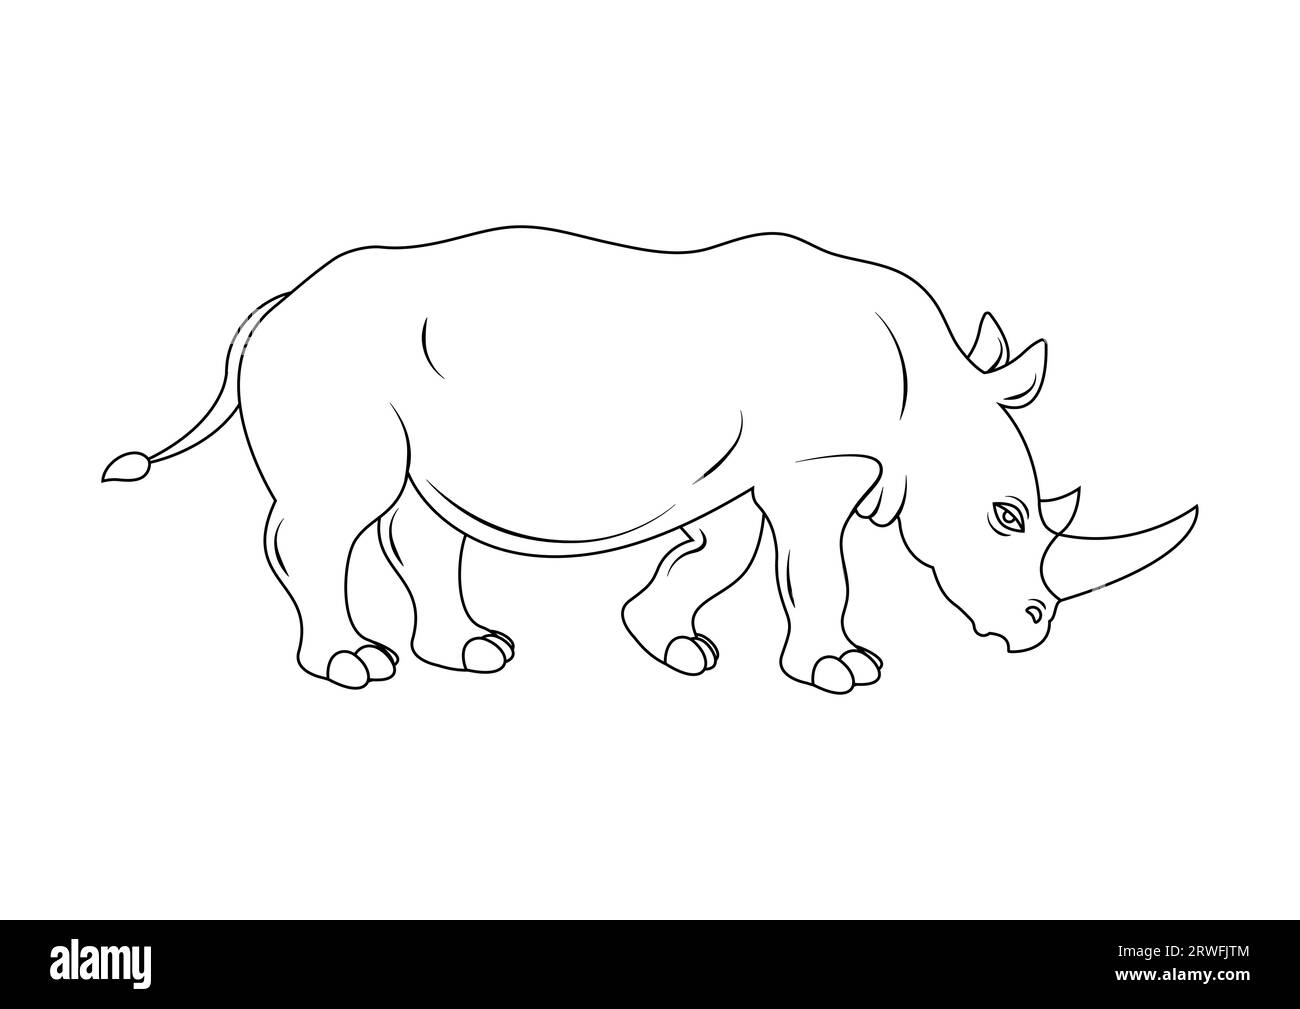 Coloring Page of a Rhinoceros Cartoon Character Vector Stock Vector